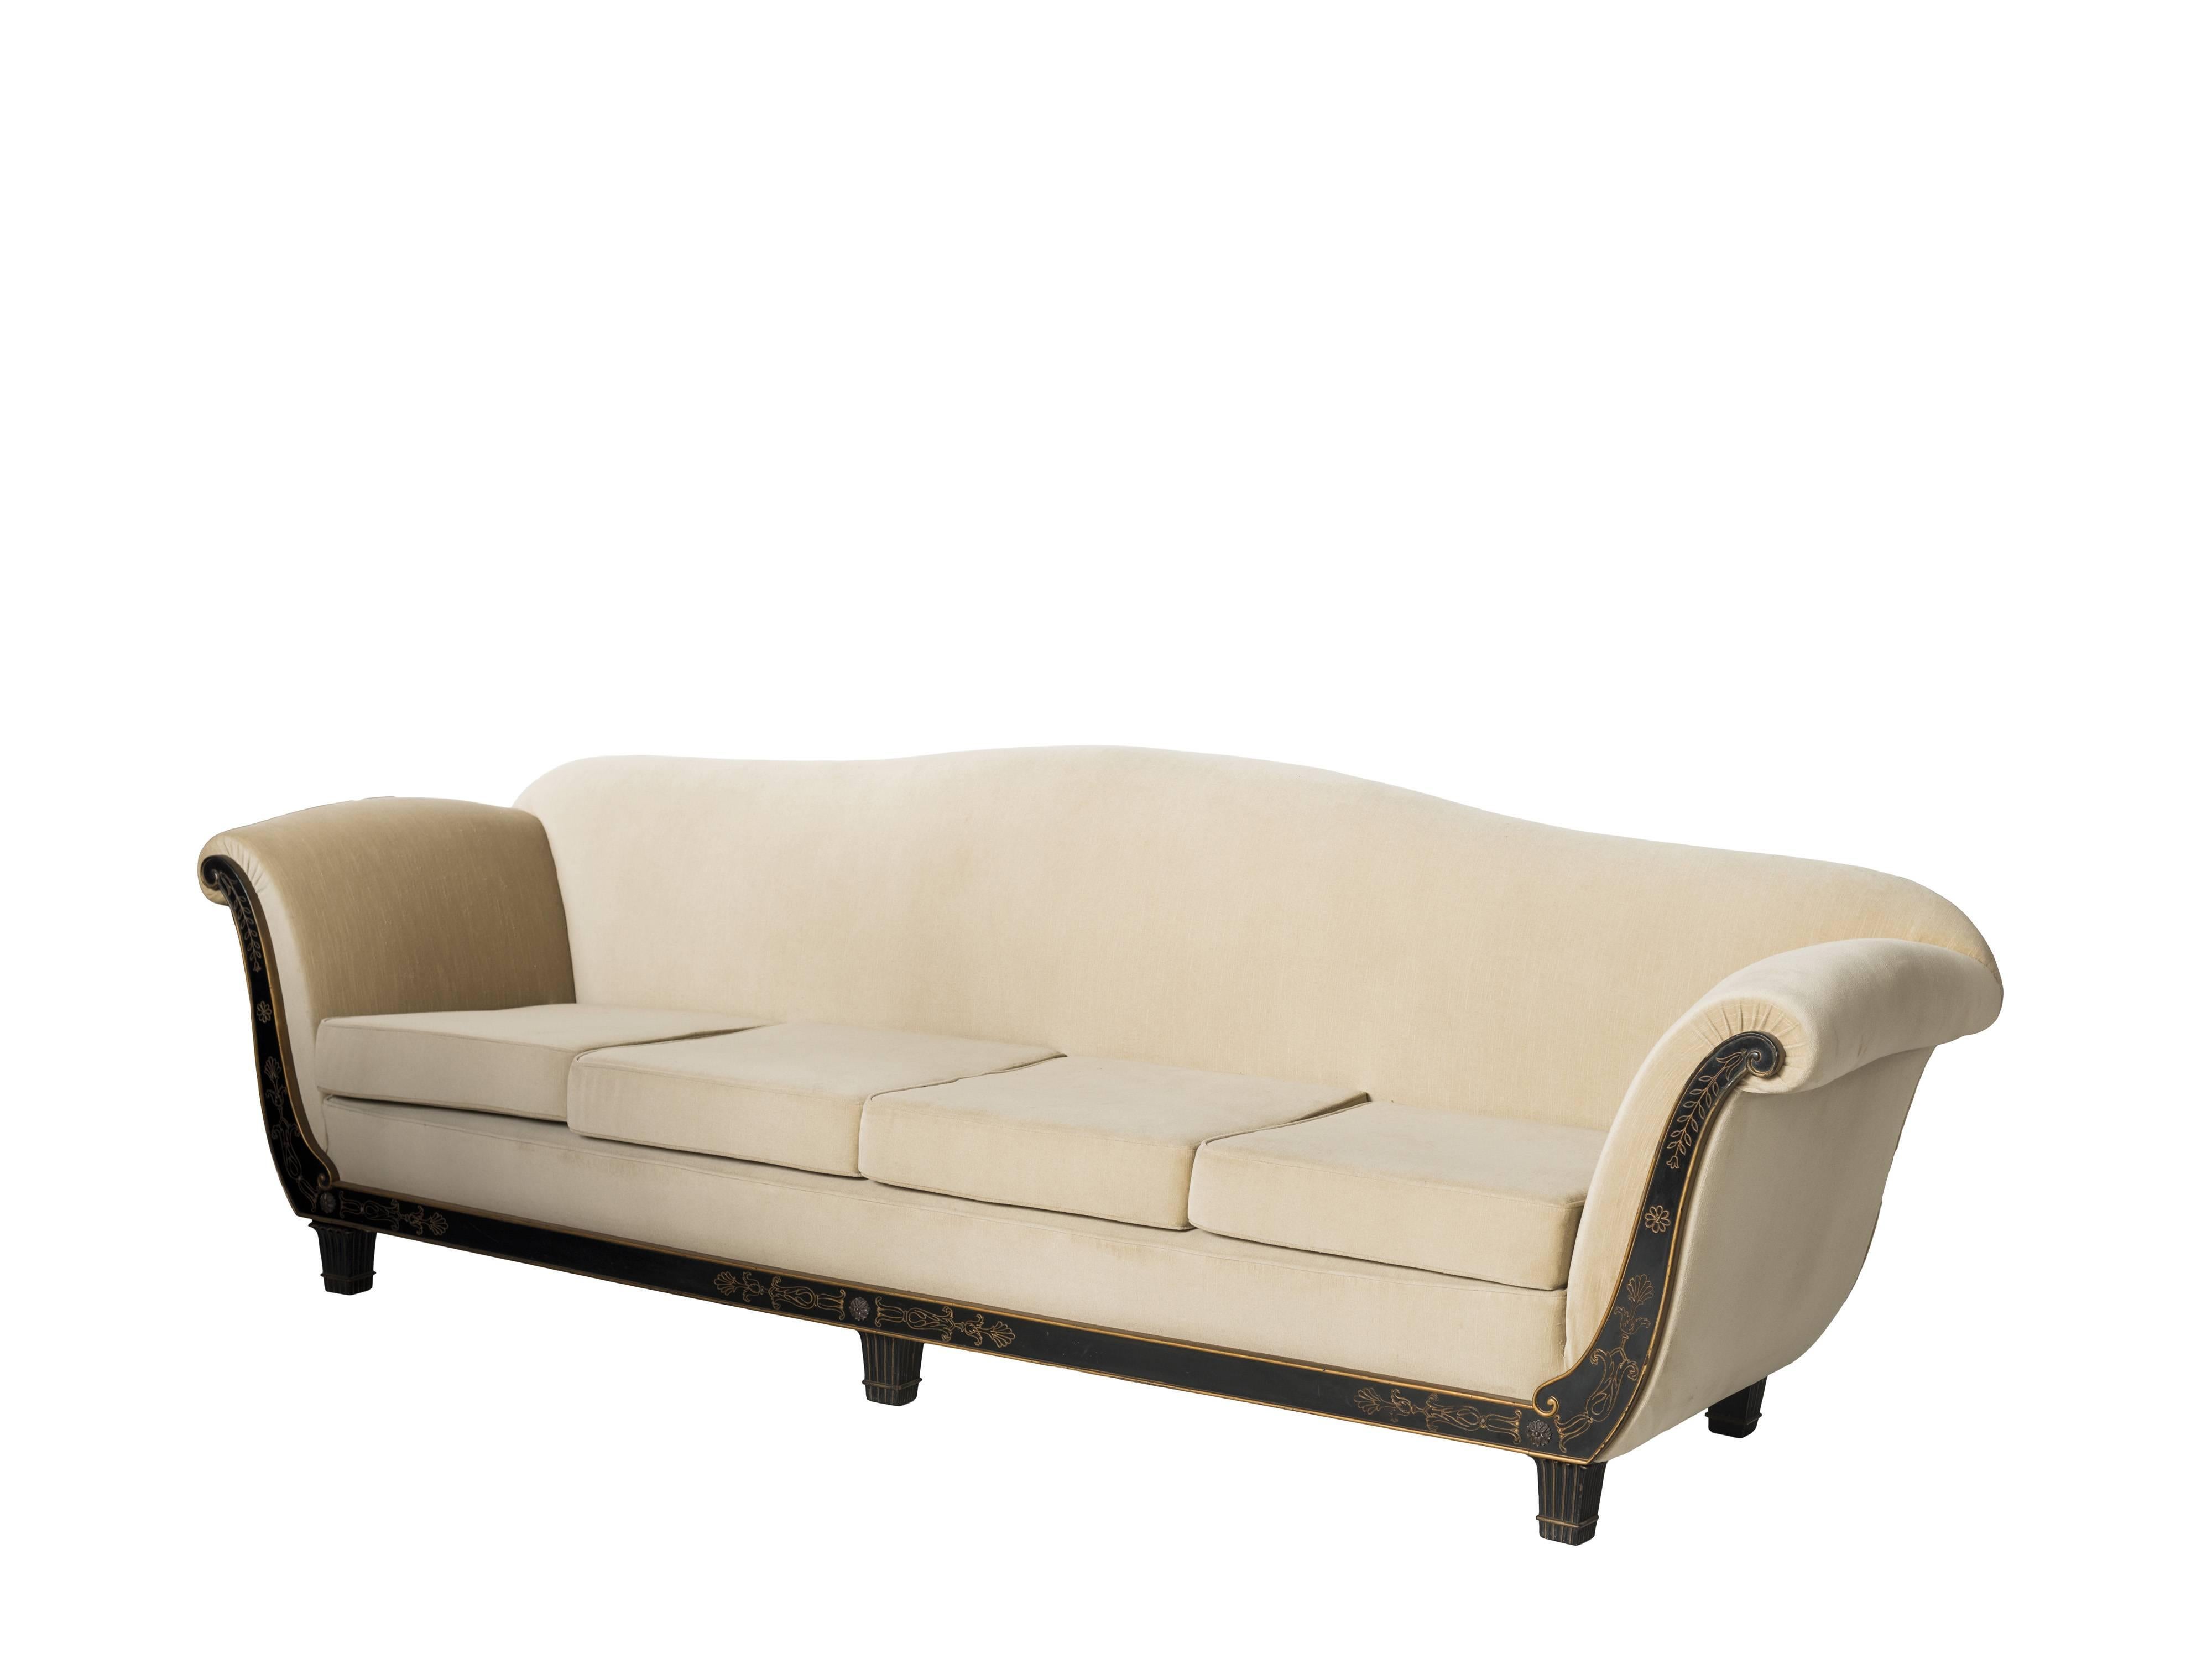 Salvatore Dinucci Midcentury Brazilian Sofa with Velvet Upholstery, 1950s
 
Virtually unknown by the general public, Dinucci, as the signature on his furniture said, was a major producer of modern Brazilian furniture between the 1940s and 1960s.